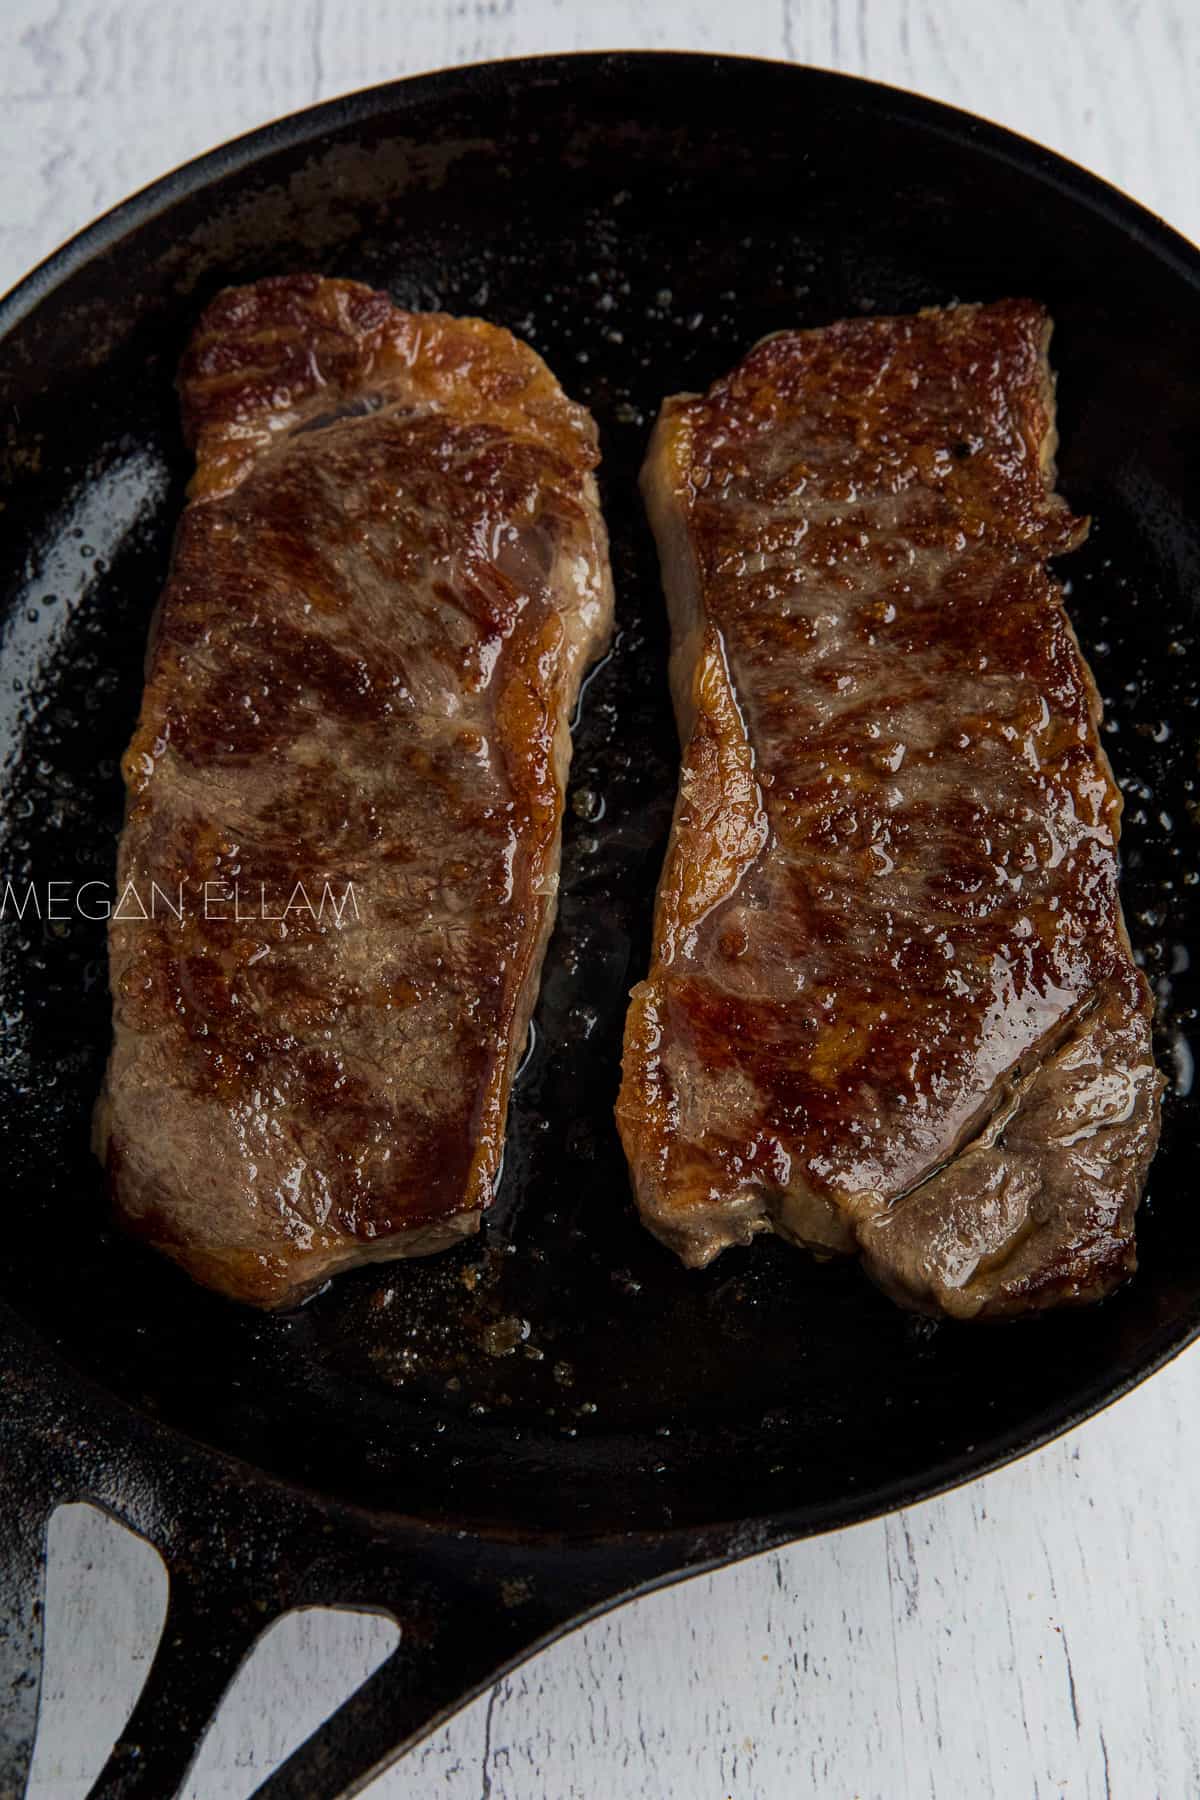 Cooked steak in a pan.